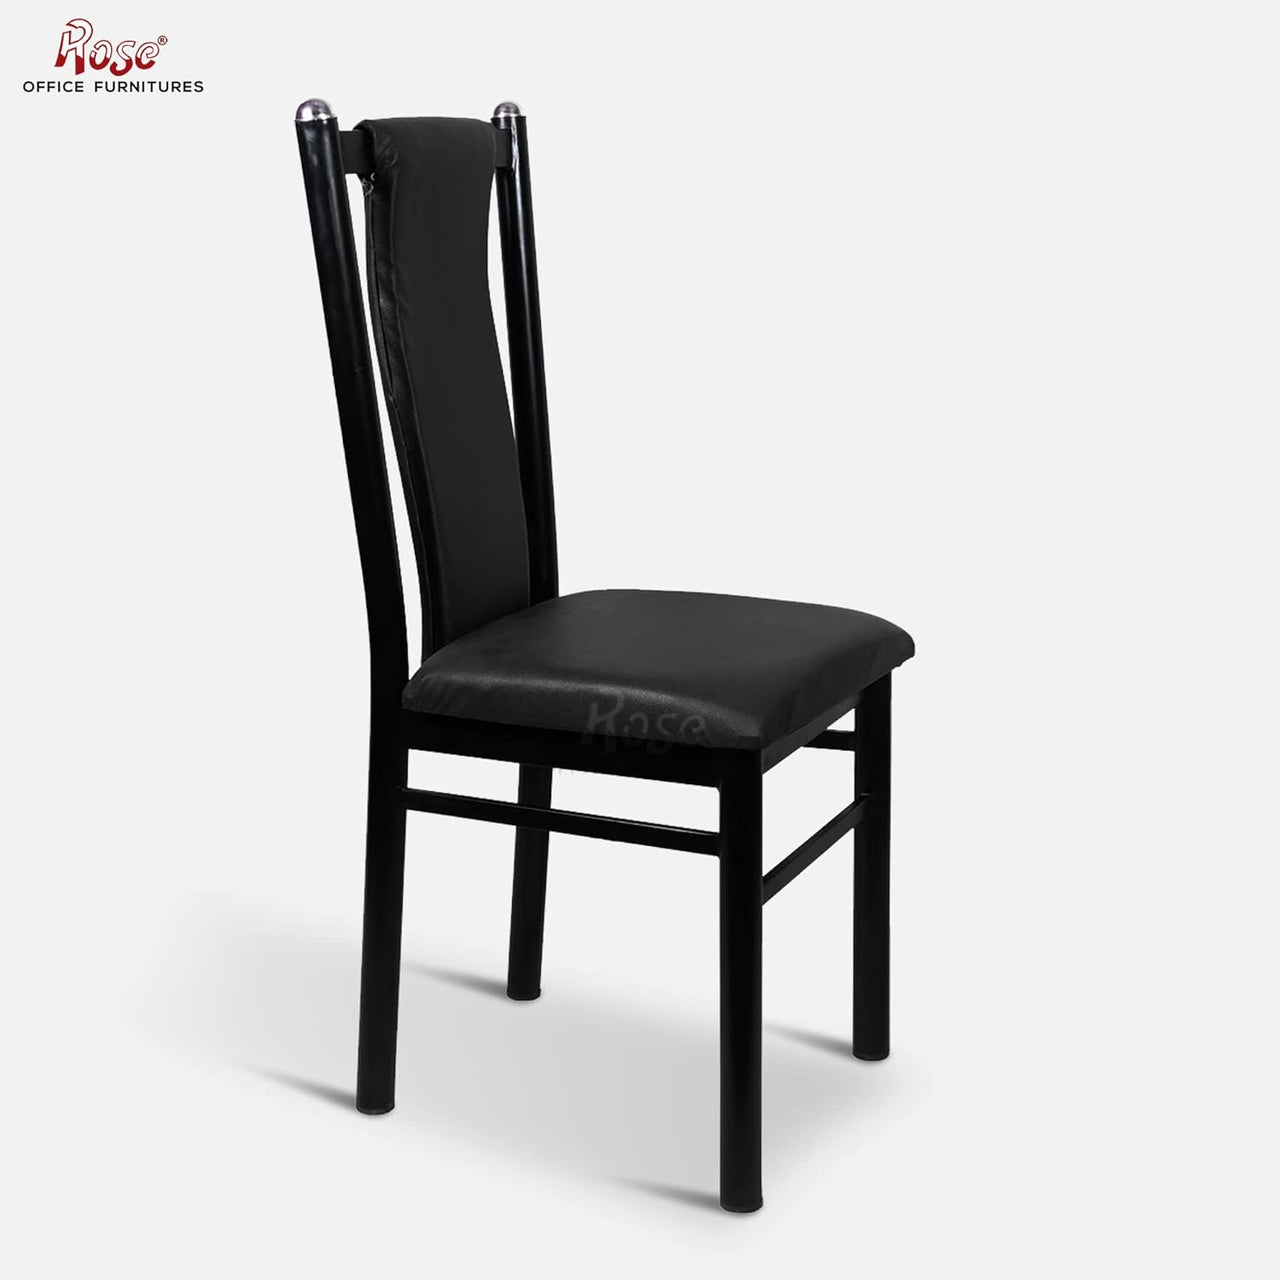 Duke Dinning Chairs for Kitchen & Dining Room  (Black, Metal)